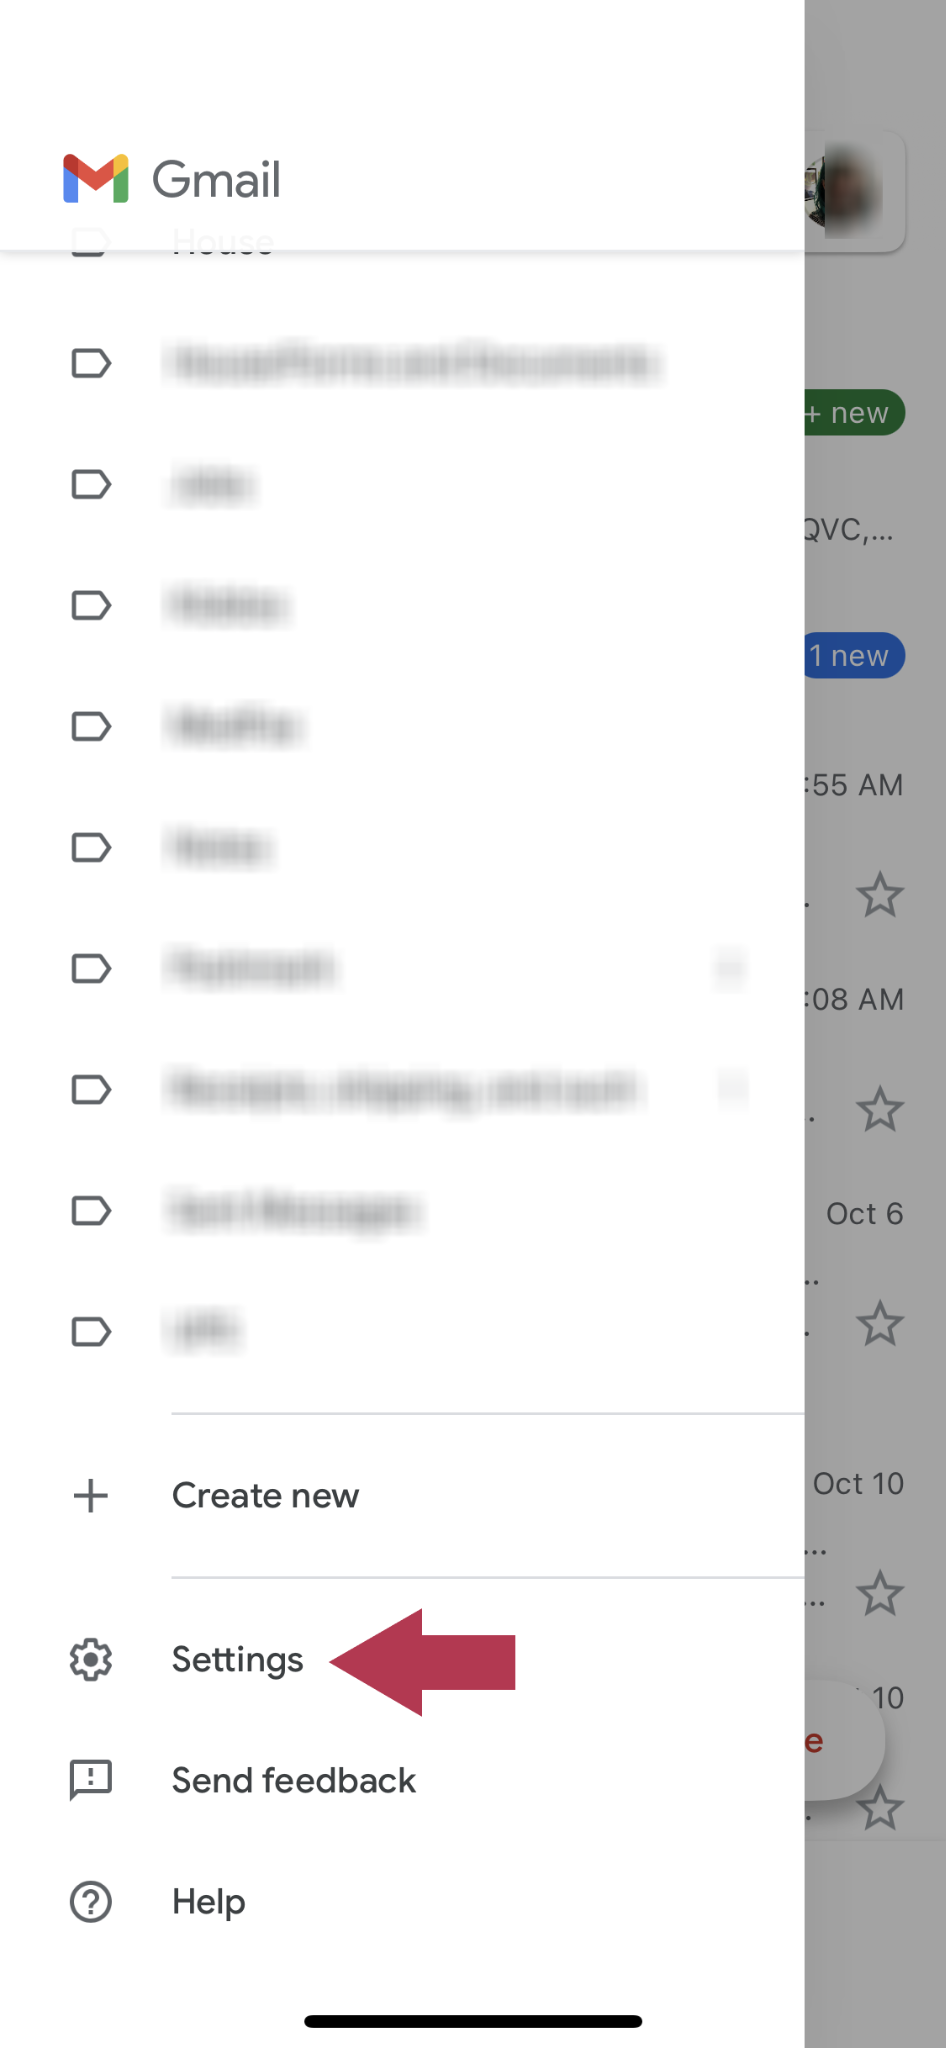 Select-“Settings”-from-the-drop-down-list